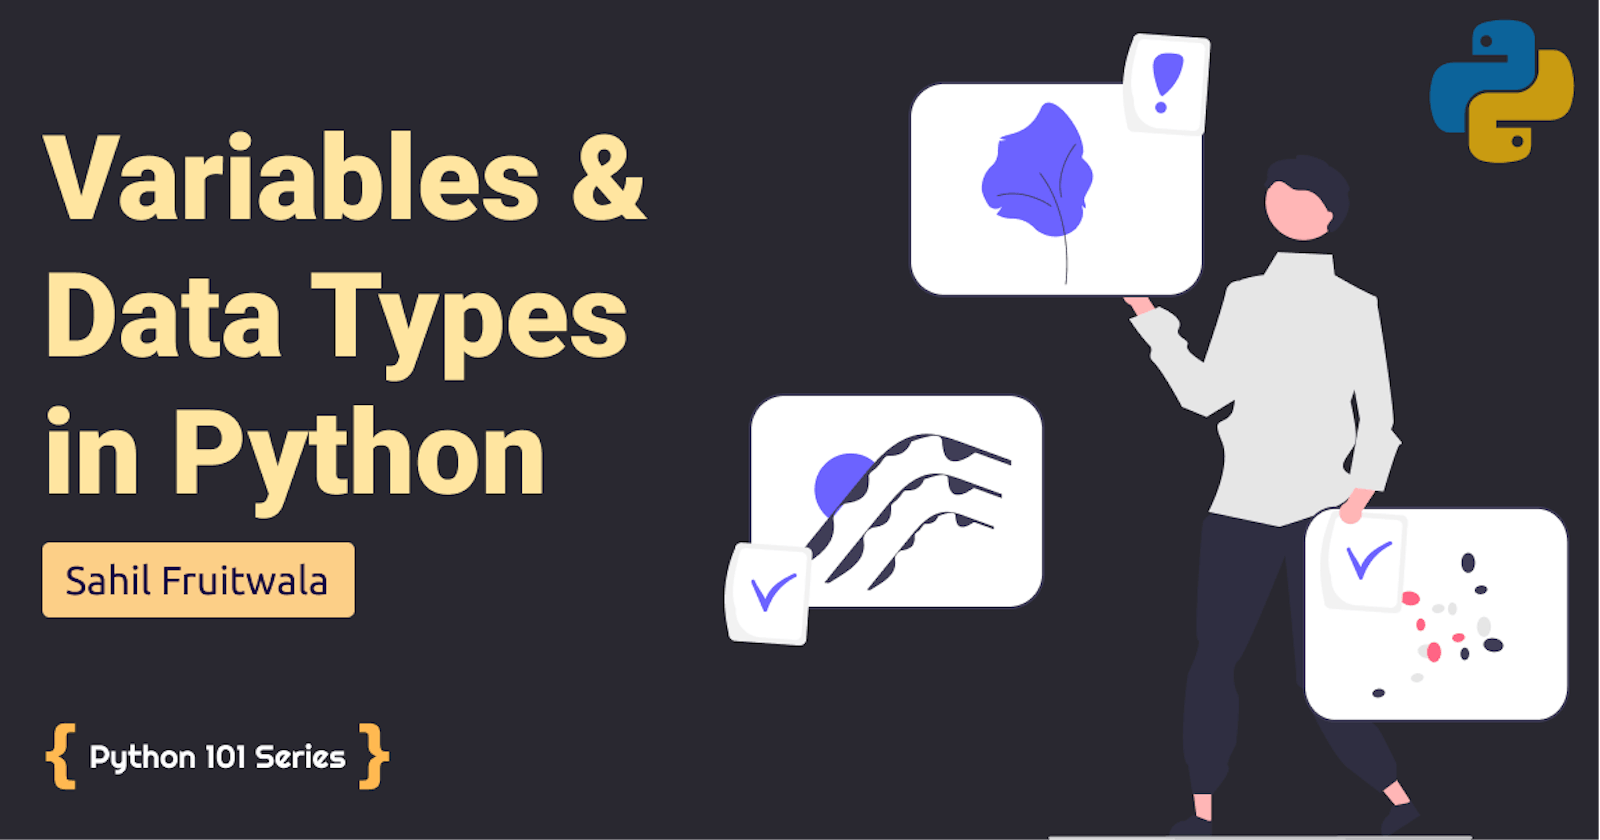 Variables & Data Types in Python